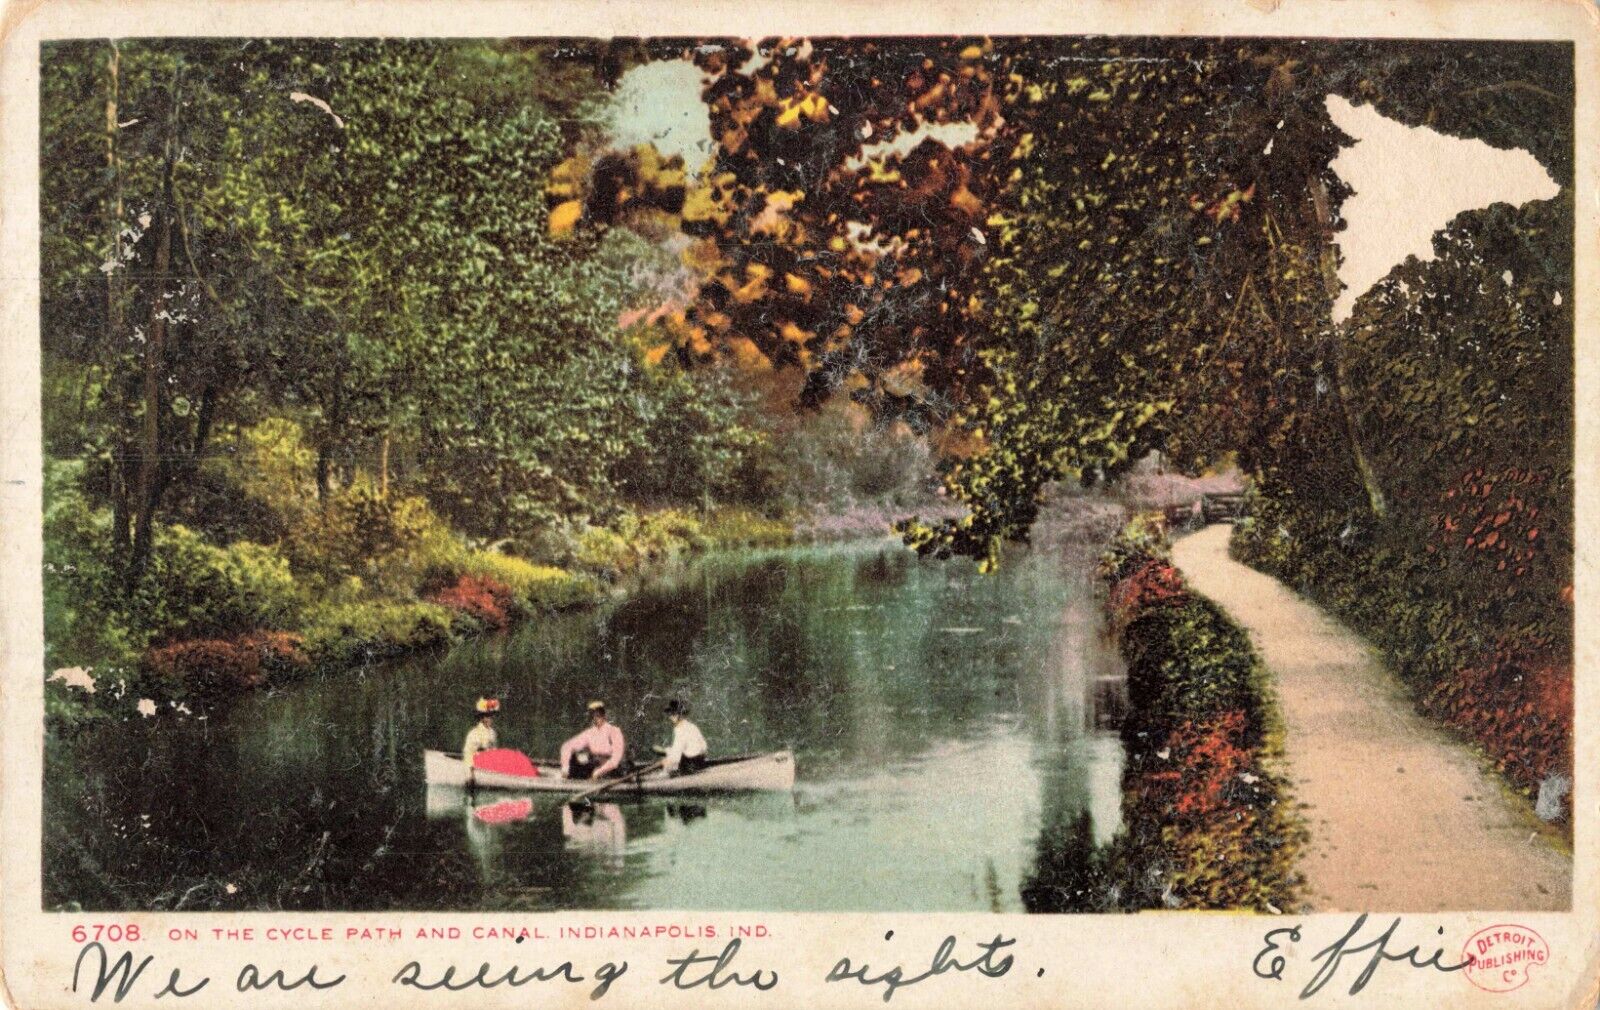 On the Cycle Path and Canal, Indianapolis, Indiana IN - 1906 Vintage Postcard